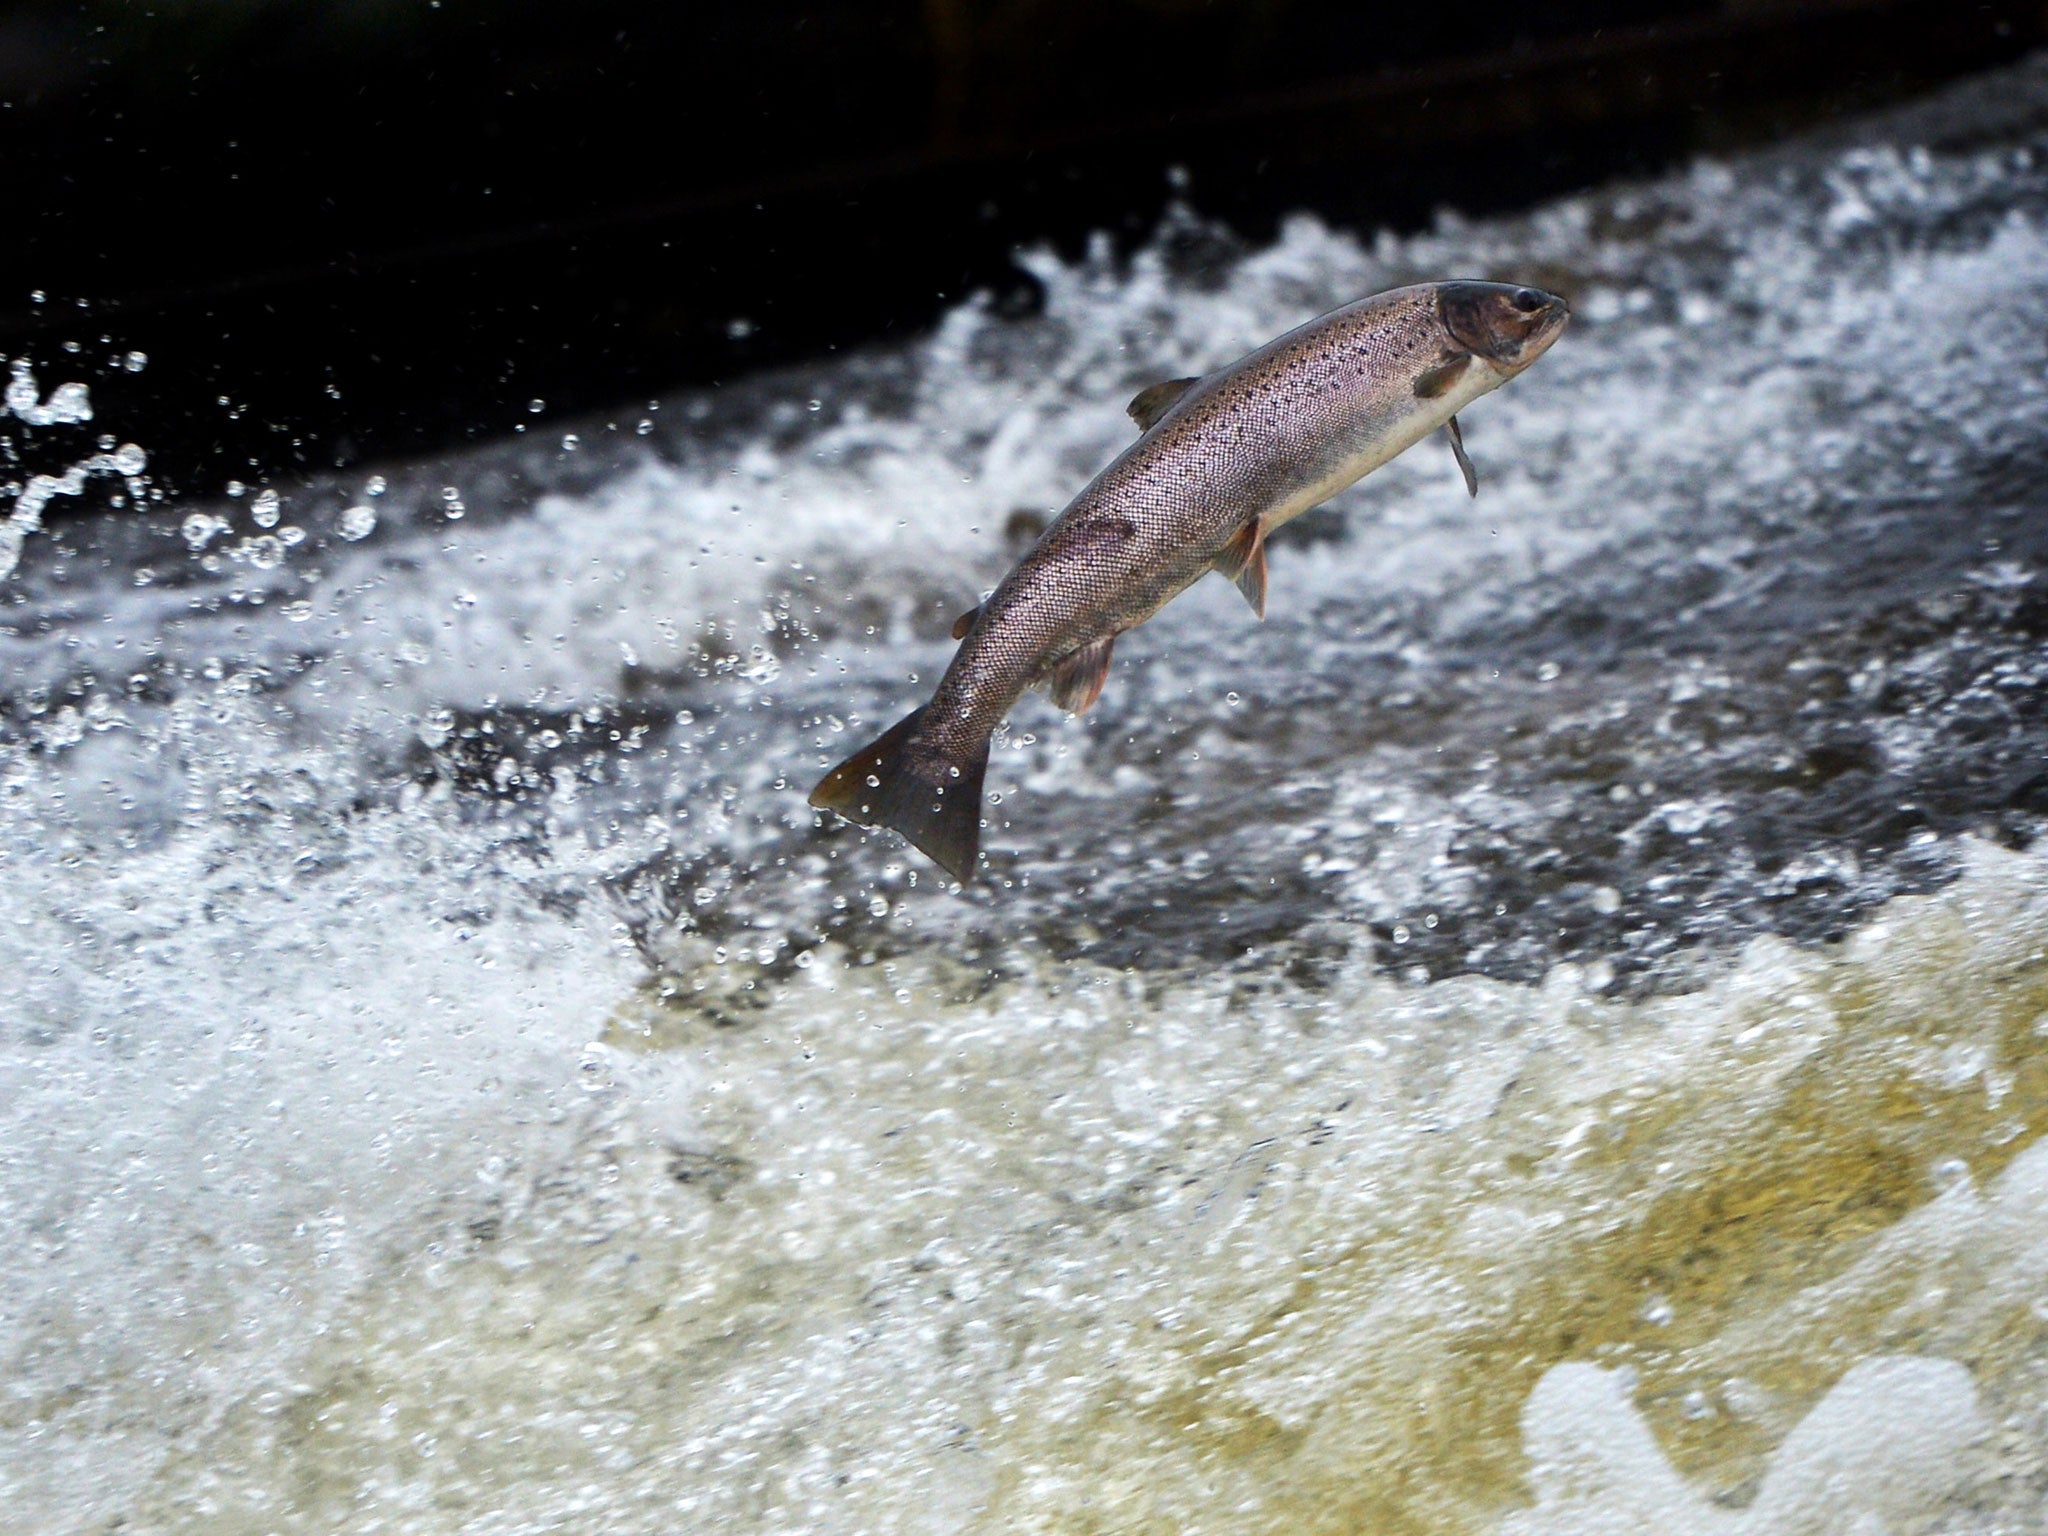 More than 95 per cent of salmon in the world are now farmed, according to researchers